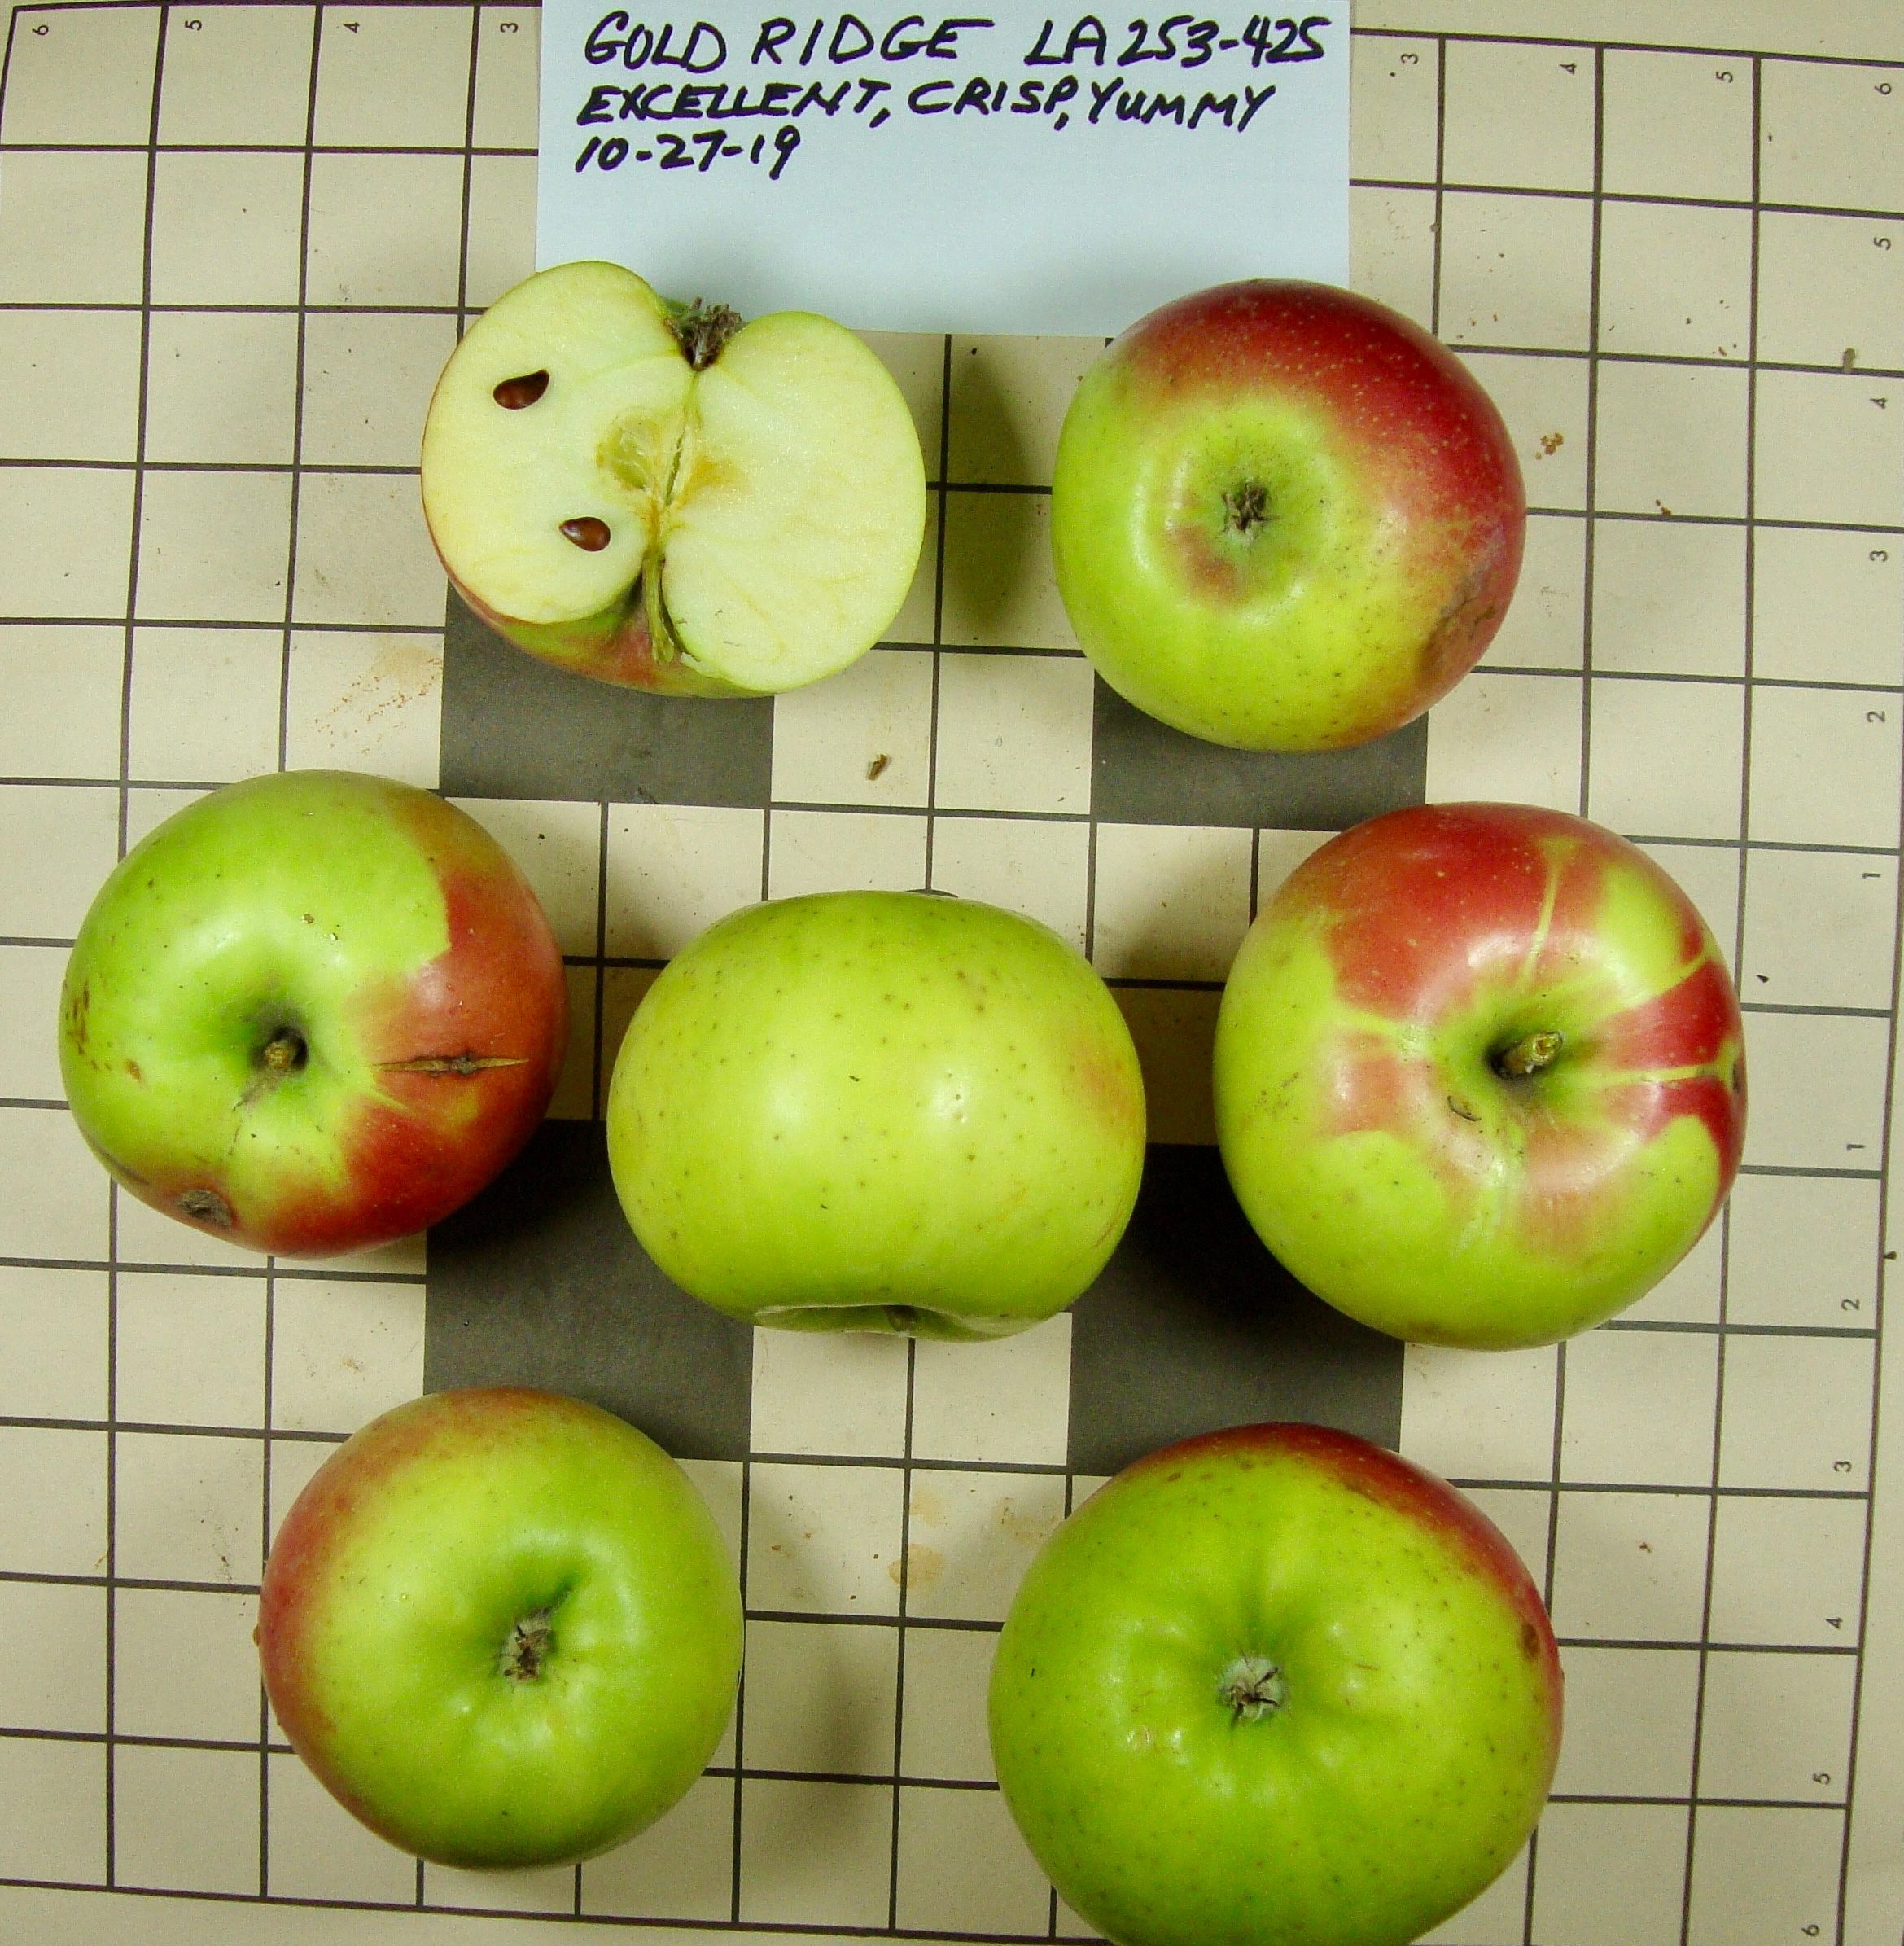 Every Apple You Eat Took Years and Years to Make - Gastro Obscura